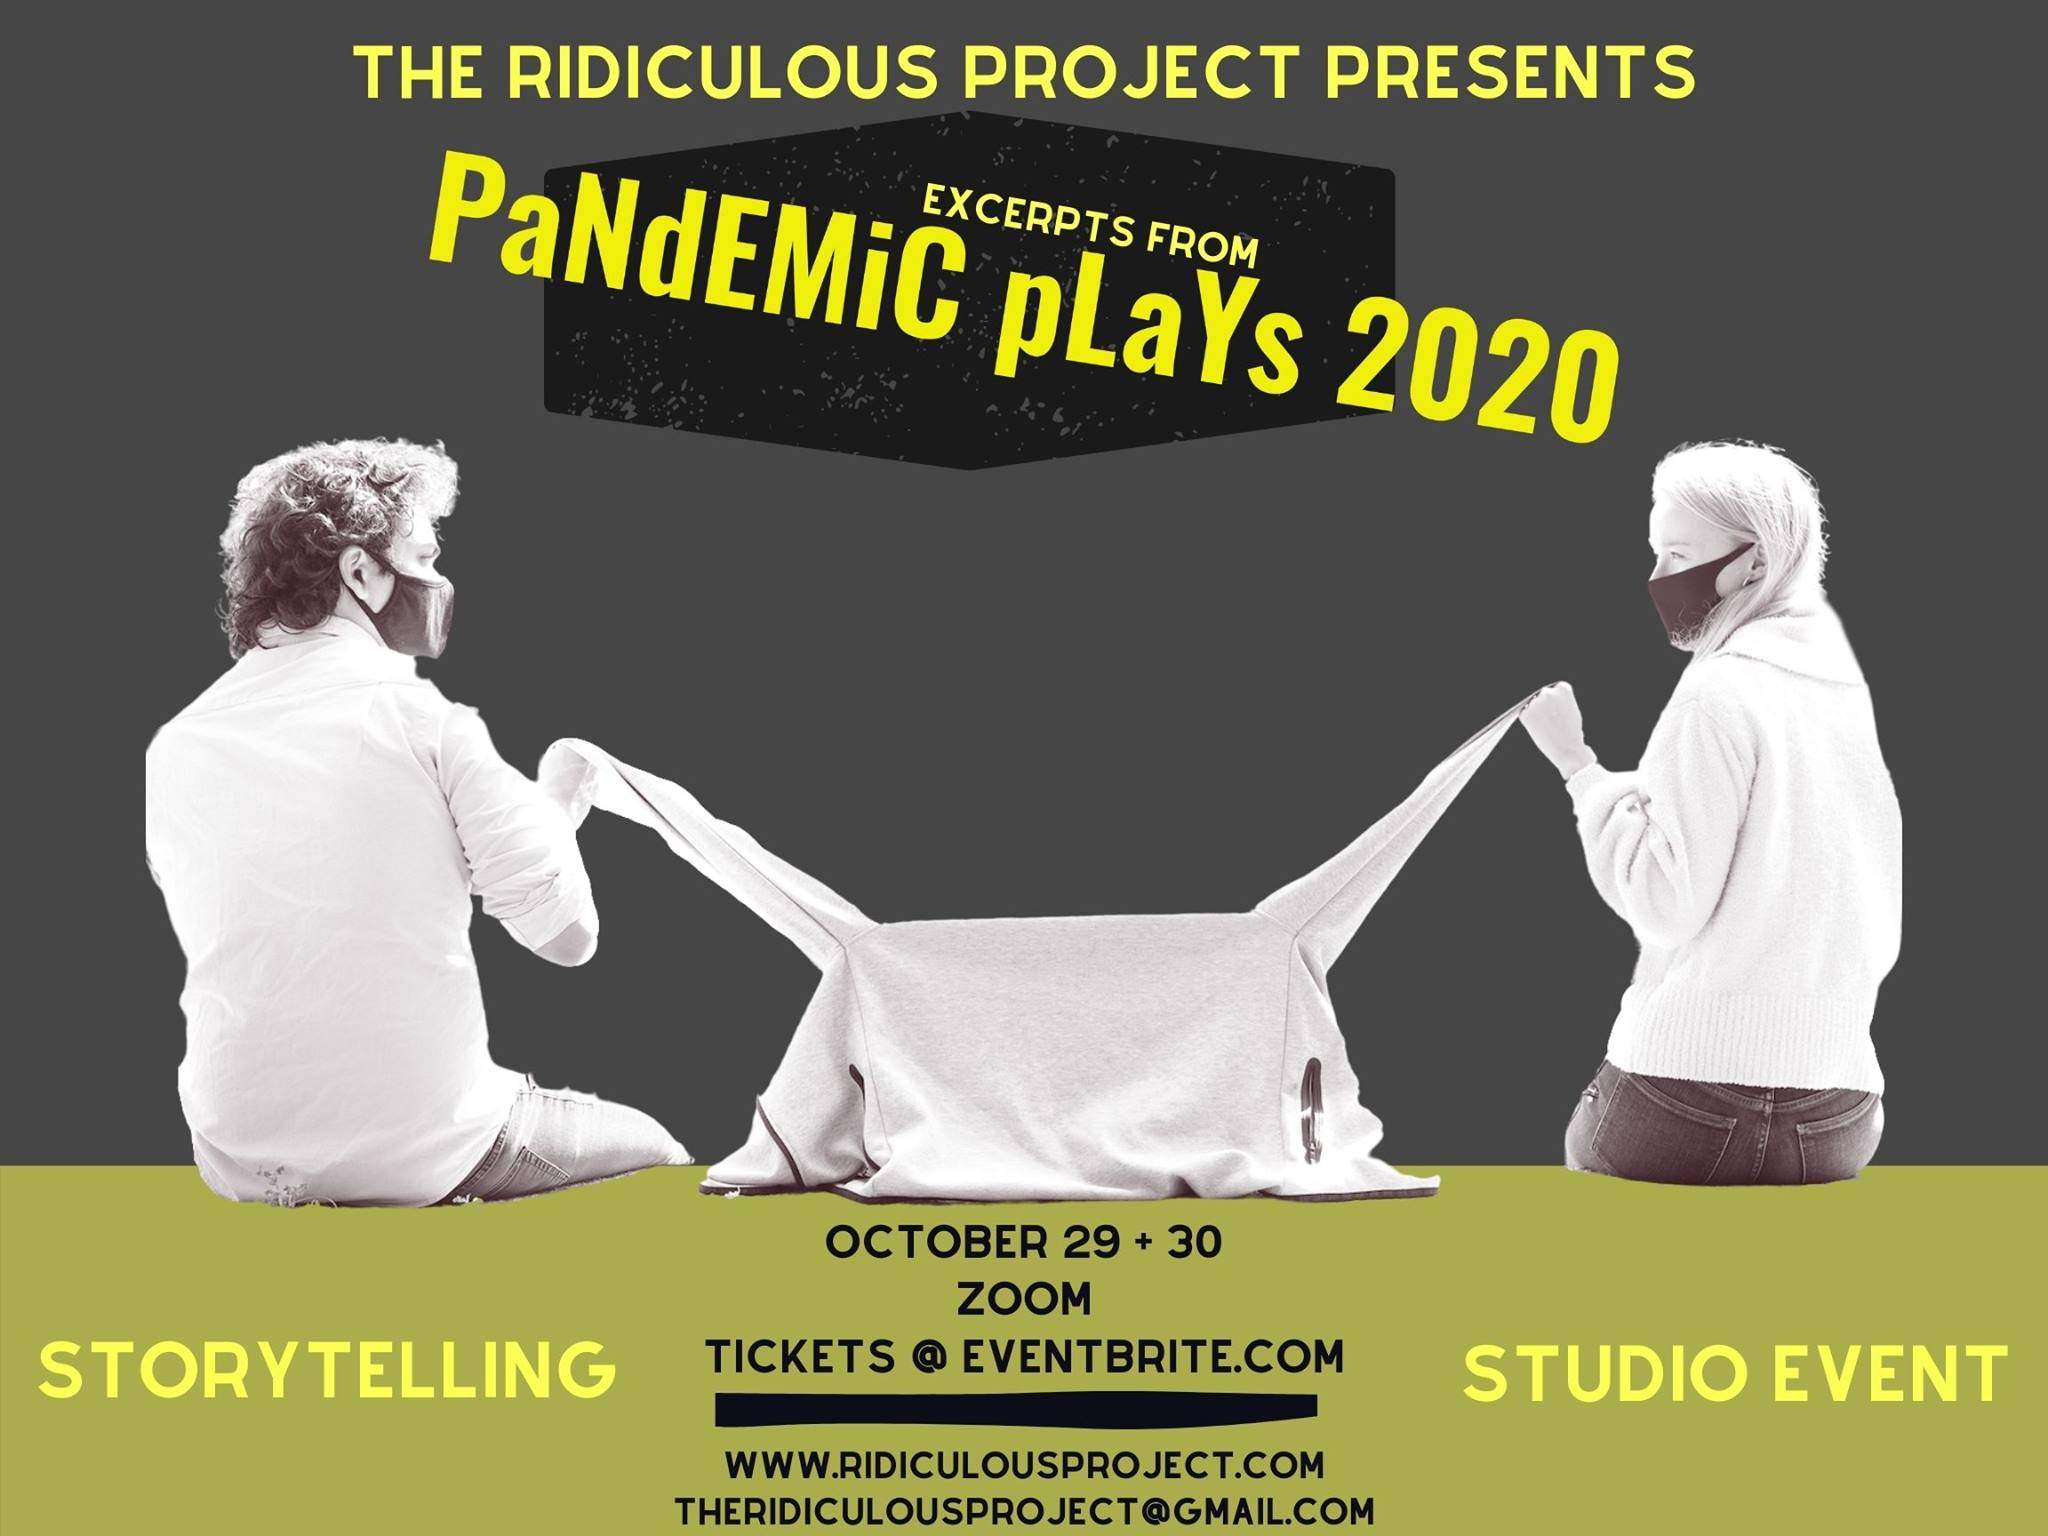 a poster for a pandemic play.